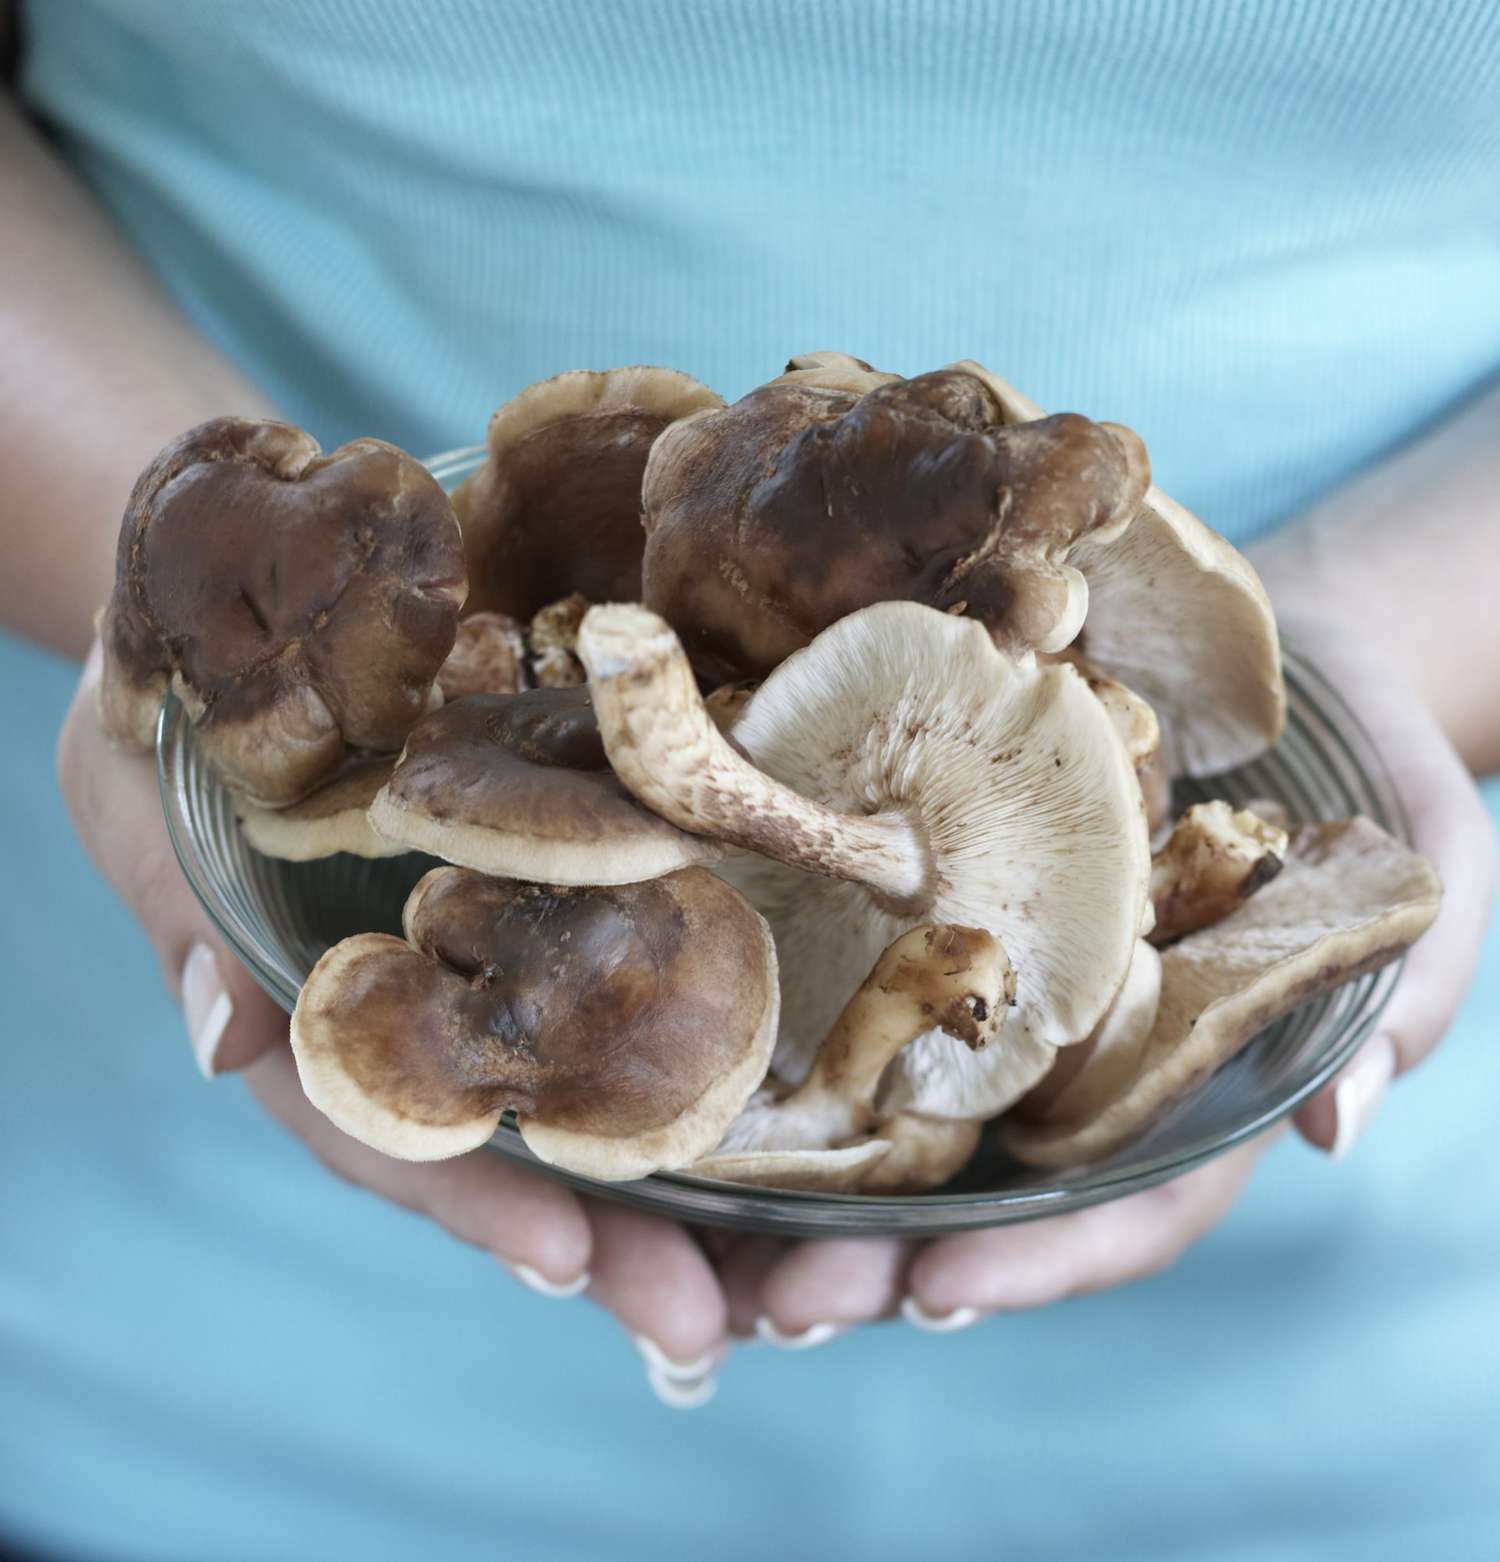 Holding Shiitakes on Plate